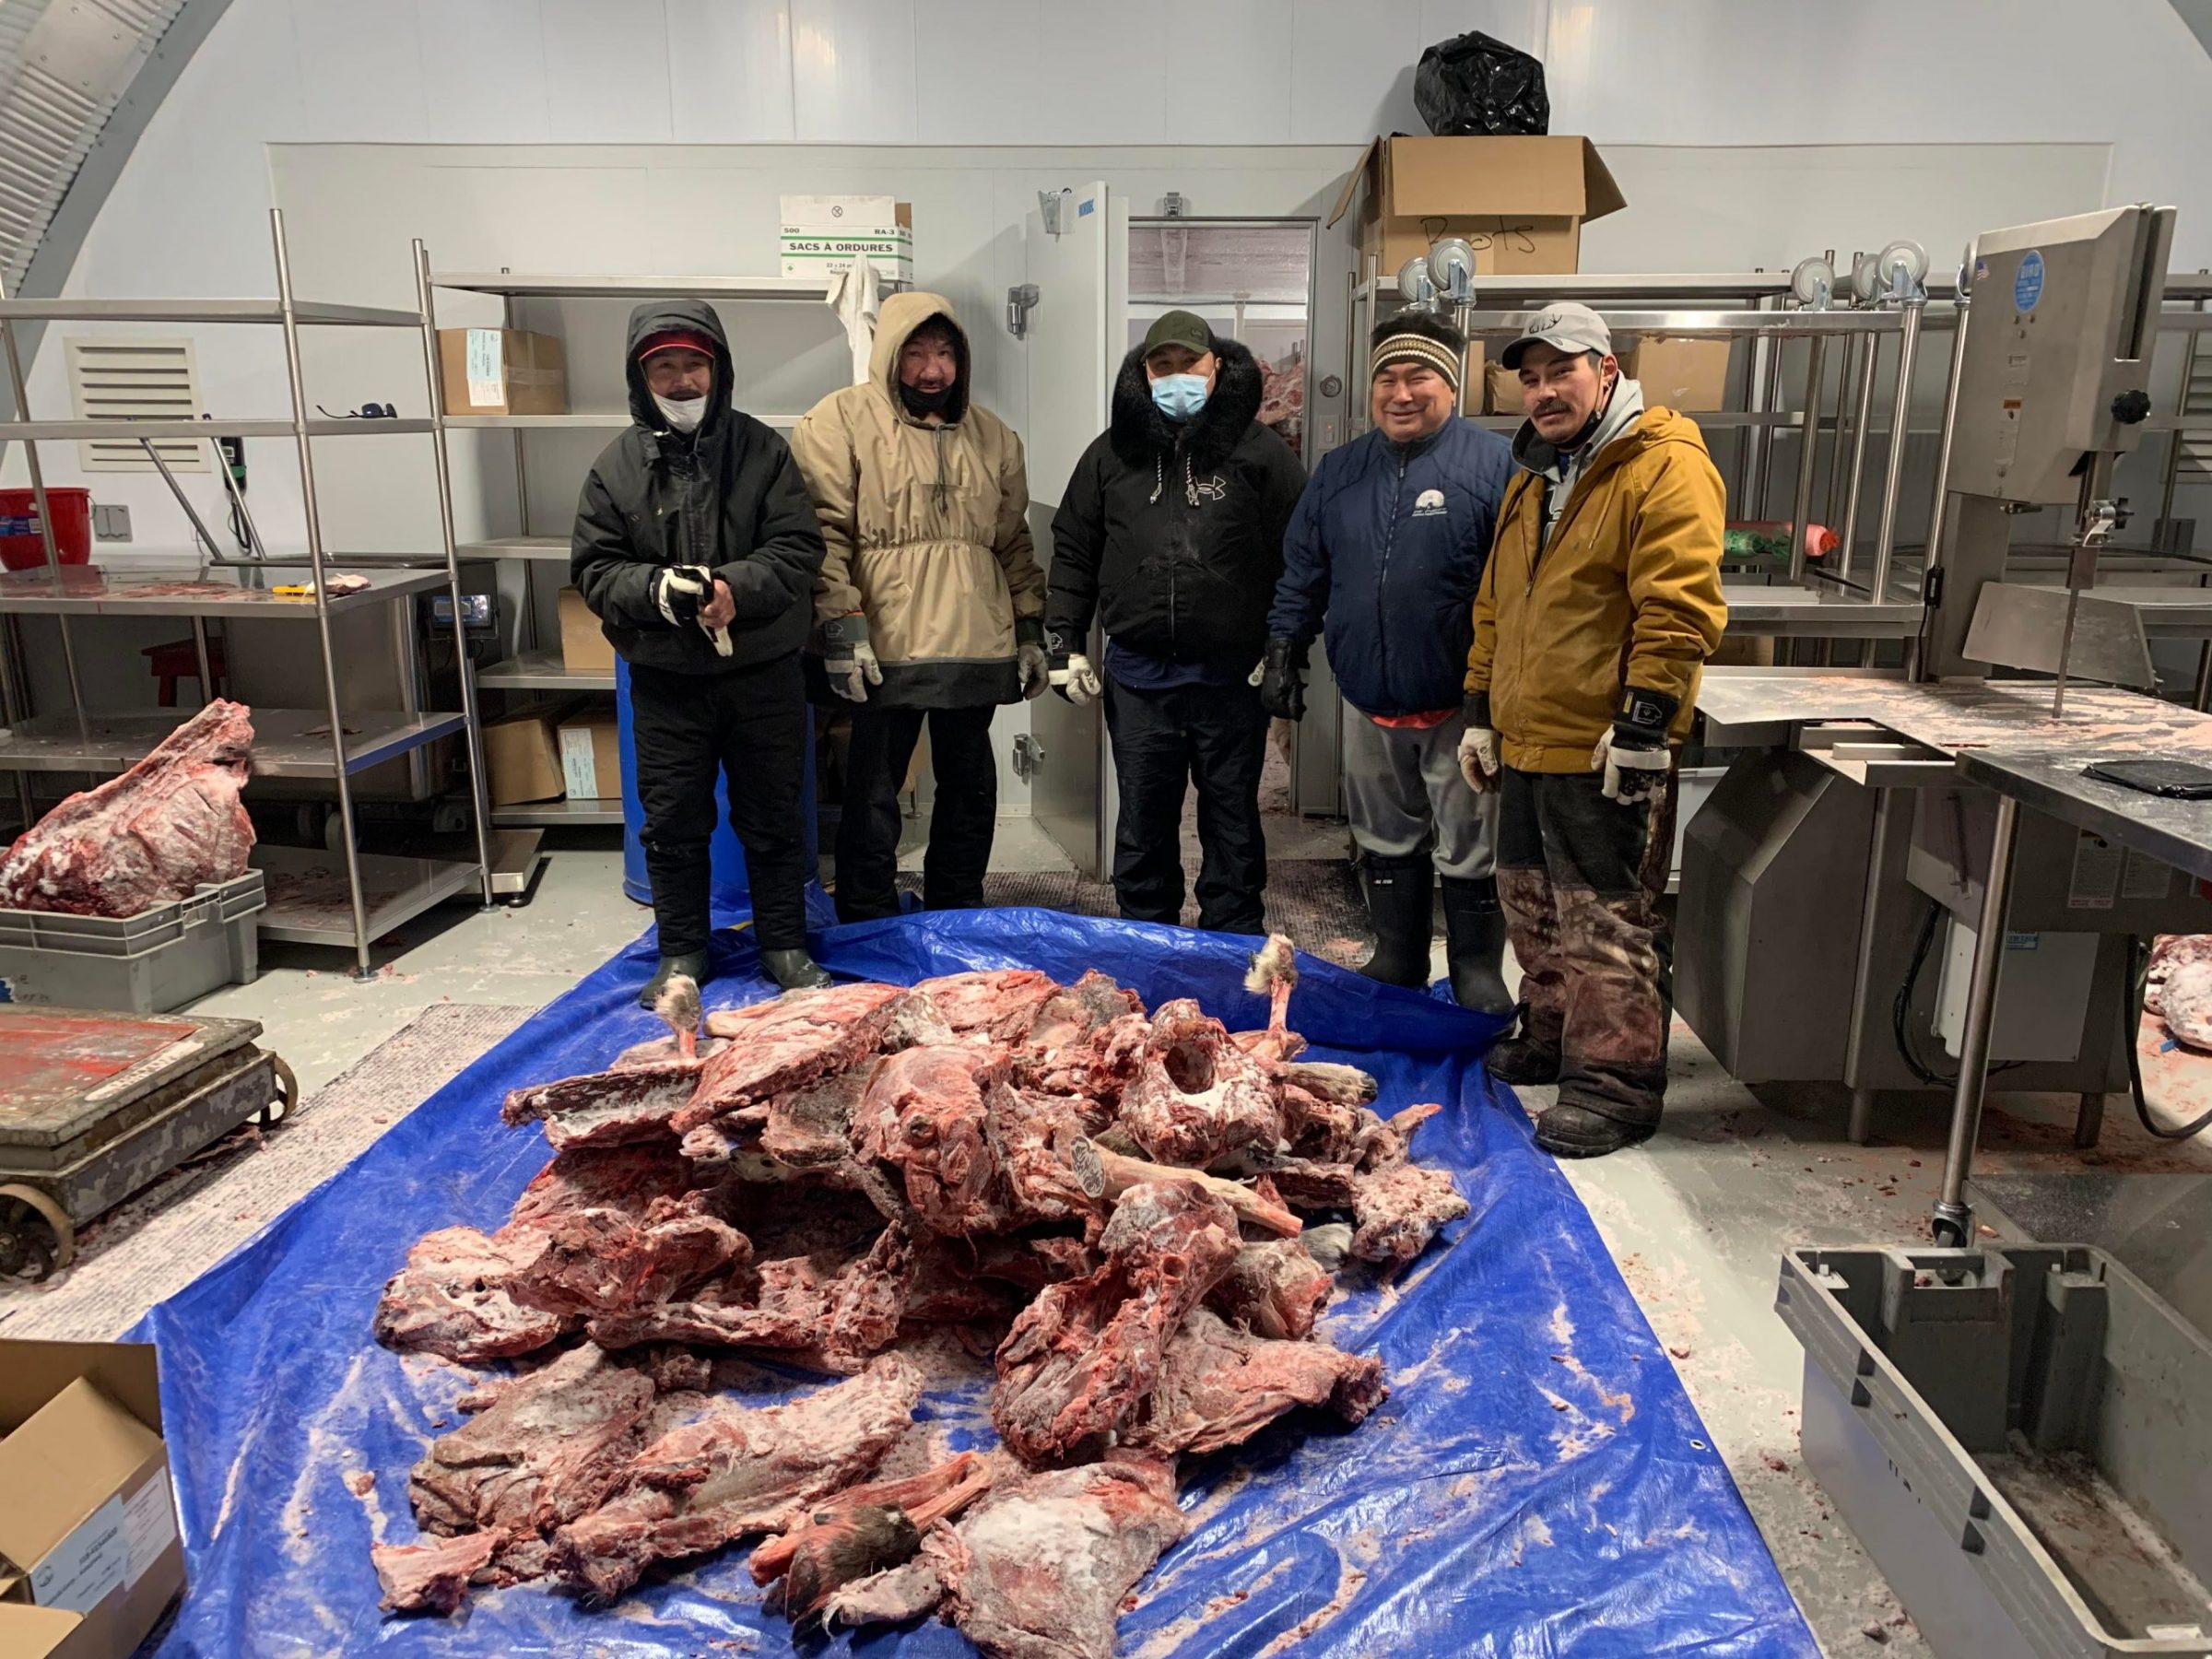 Kuujjuaq hunters prepare to distribute fresh caribou meat to their community on Tuesday. Their work is supported by Nunavik’s Hunter Support Program. From left: Henry Saunders, Moses Tooma, Benji Snowball, Silas Snowball and Adamie Kauki. (Photo by Malaya Qaunirq Chapman)